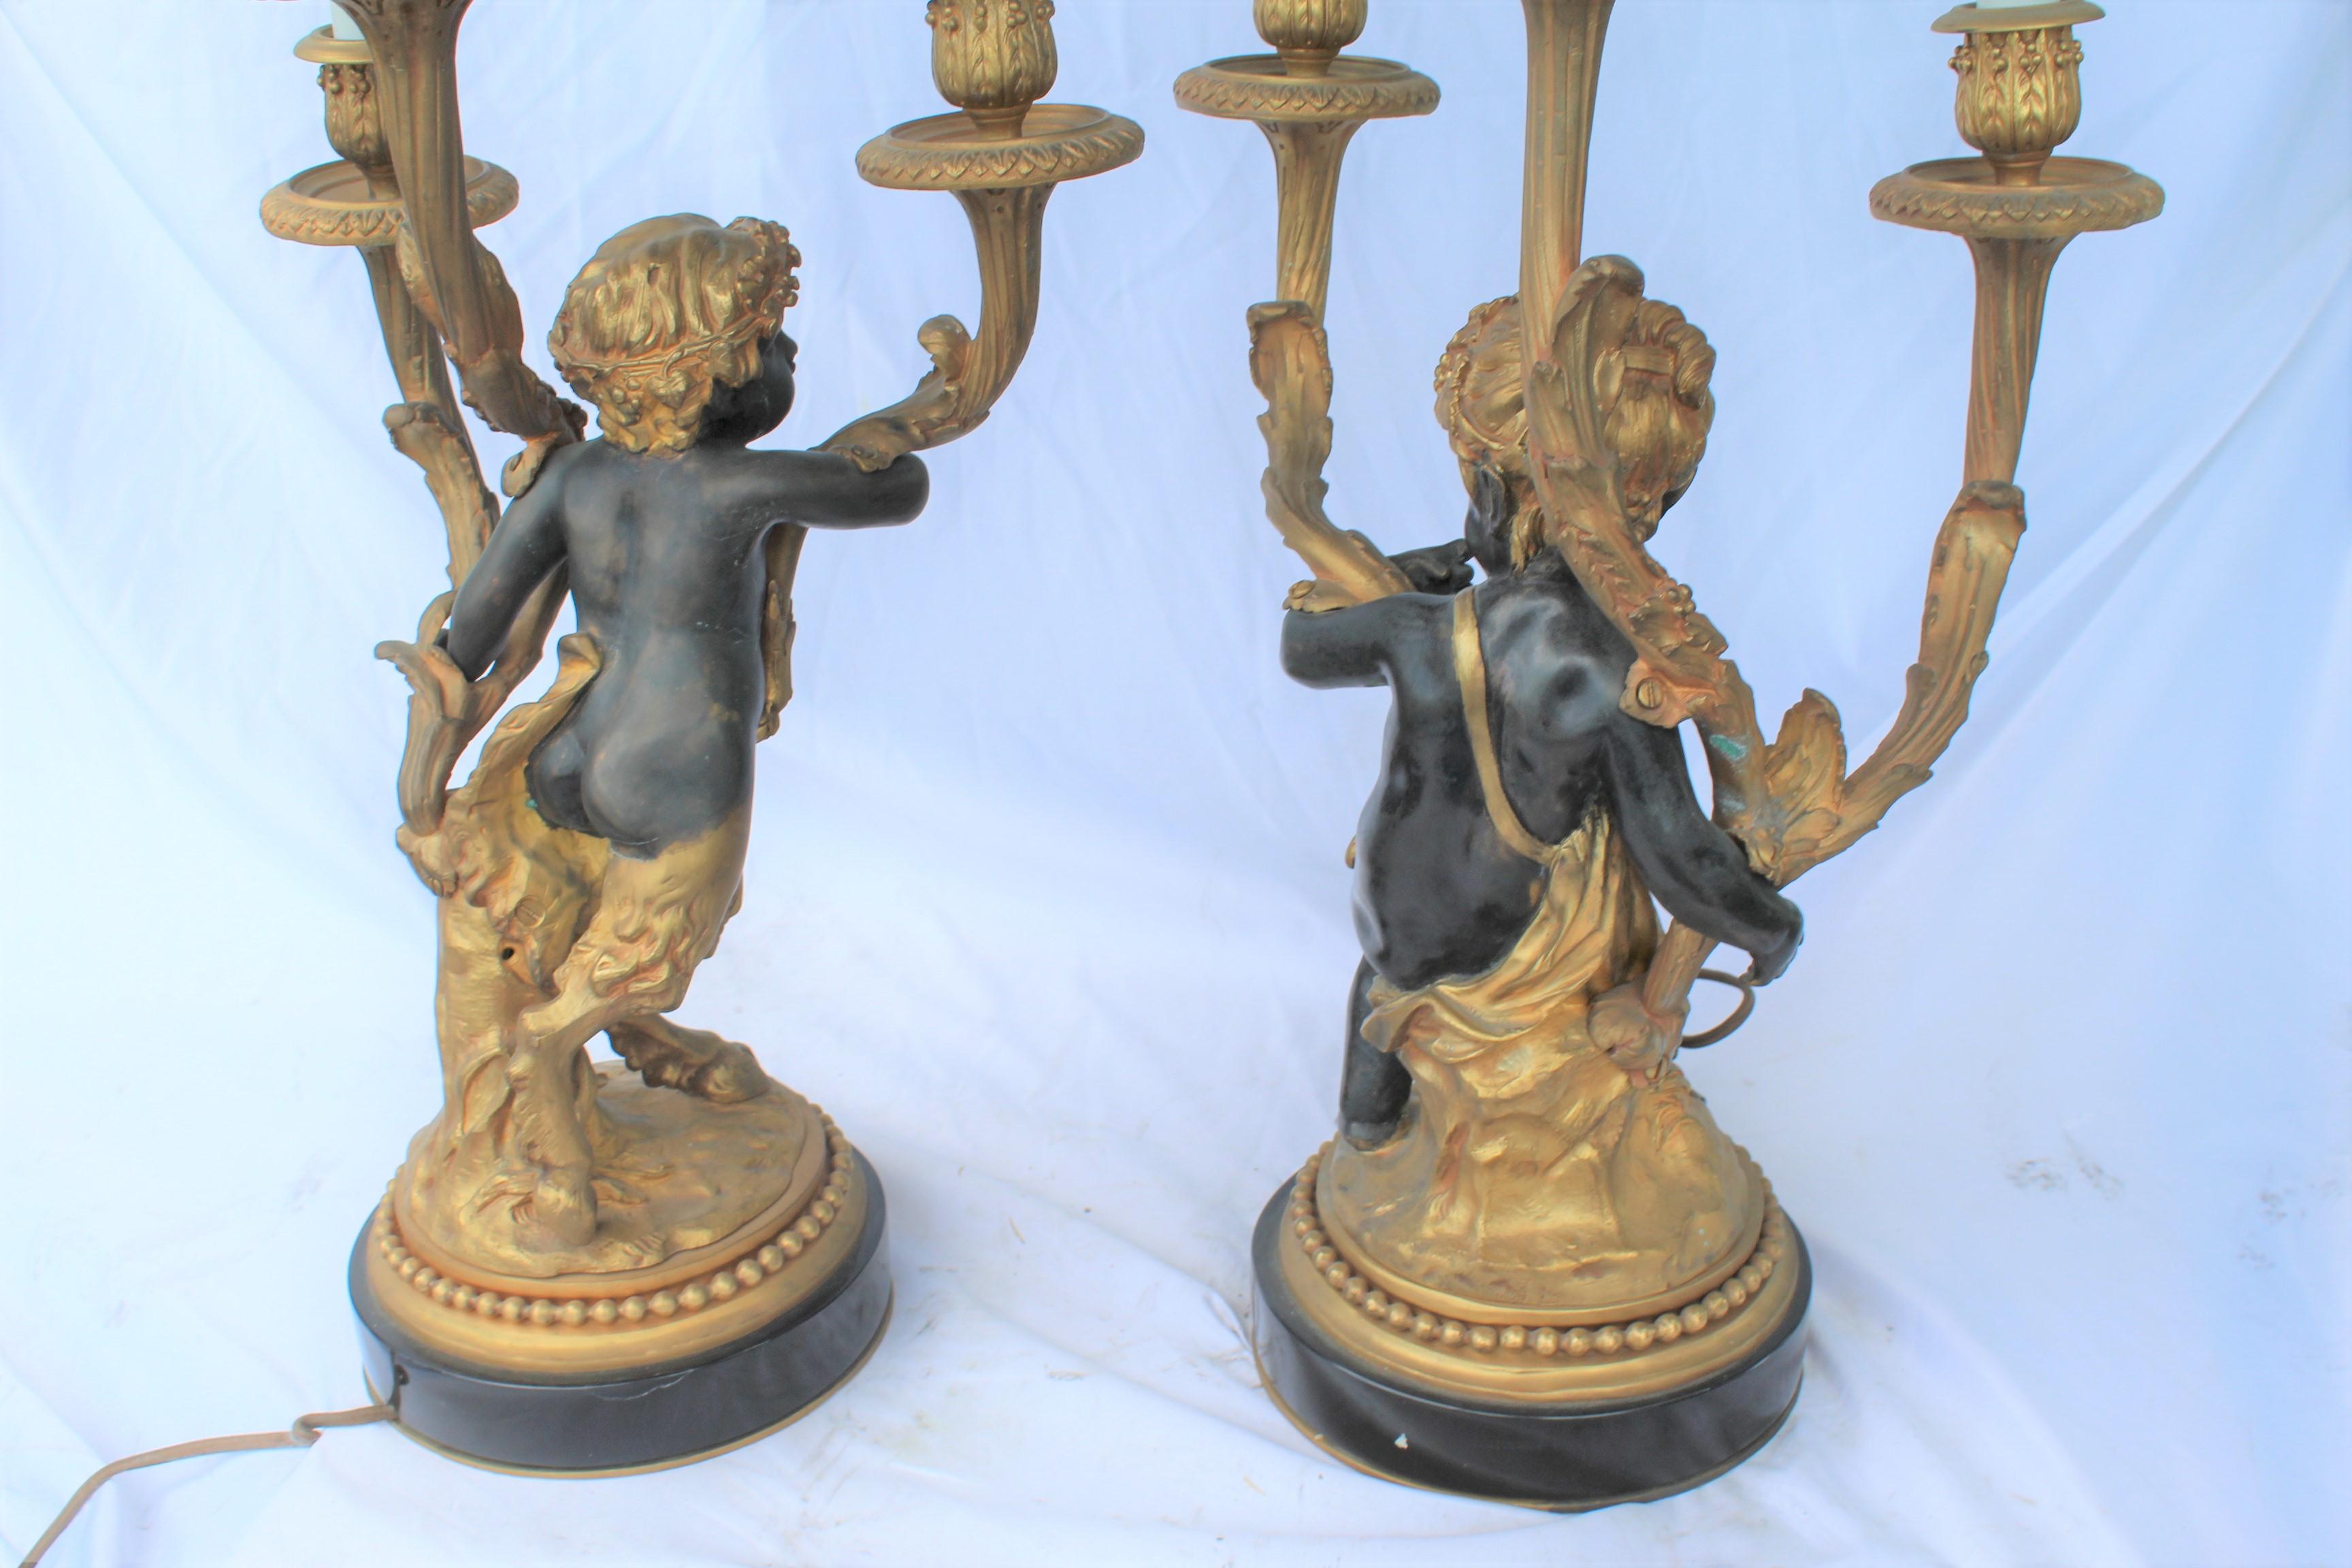 A Fine pair of Cherub candelabras cast in Lost Wax bronze with fine Hi-Quality details and black patina and 18-karat Doré gold-plated made  from the originals of Clodion. Wired and ready. Have been held in private bronze collection. Mounted on